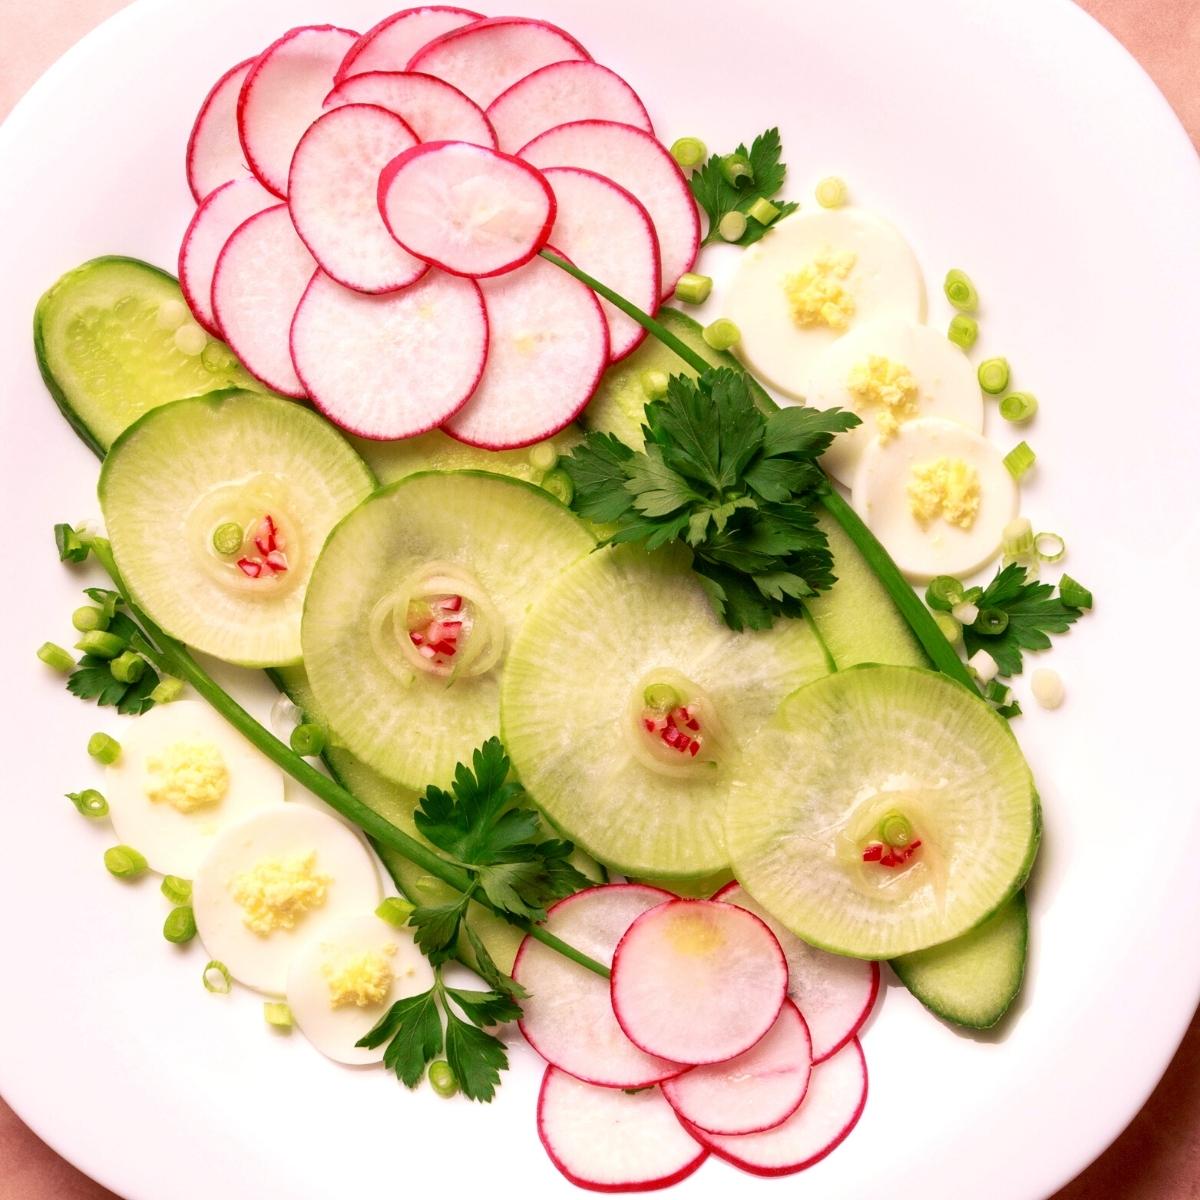 Raw sliced radishes and turnips as a salad on a white plate.